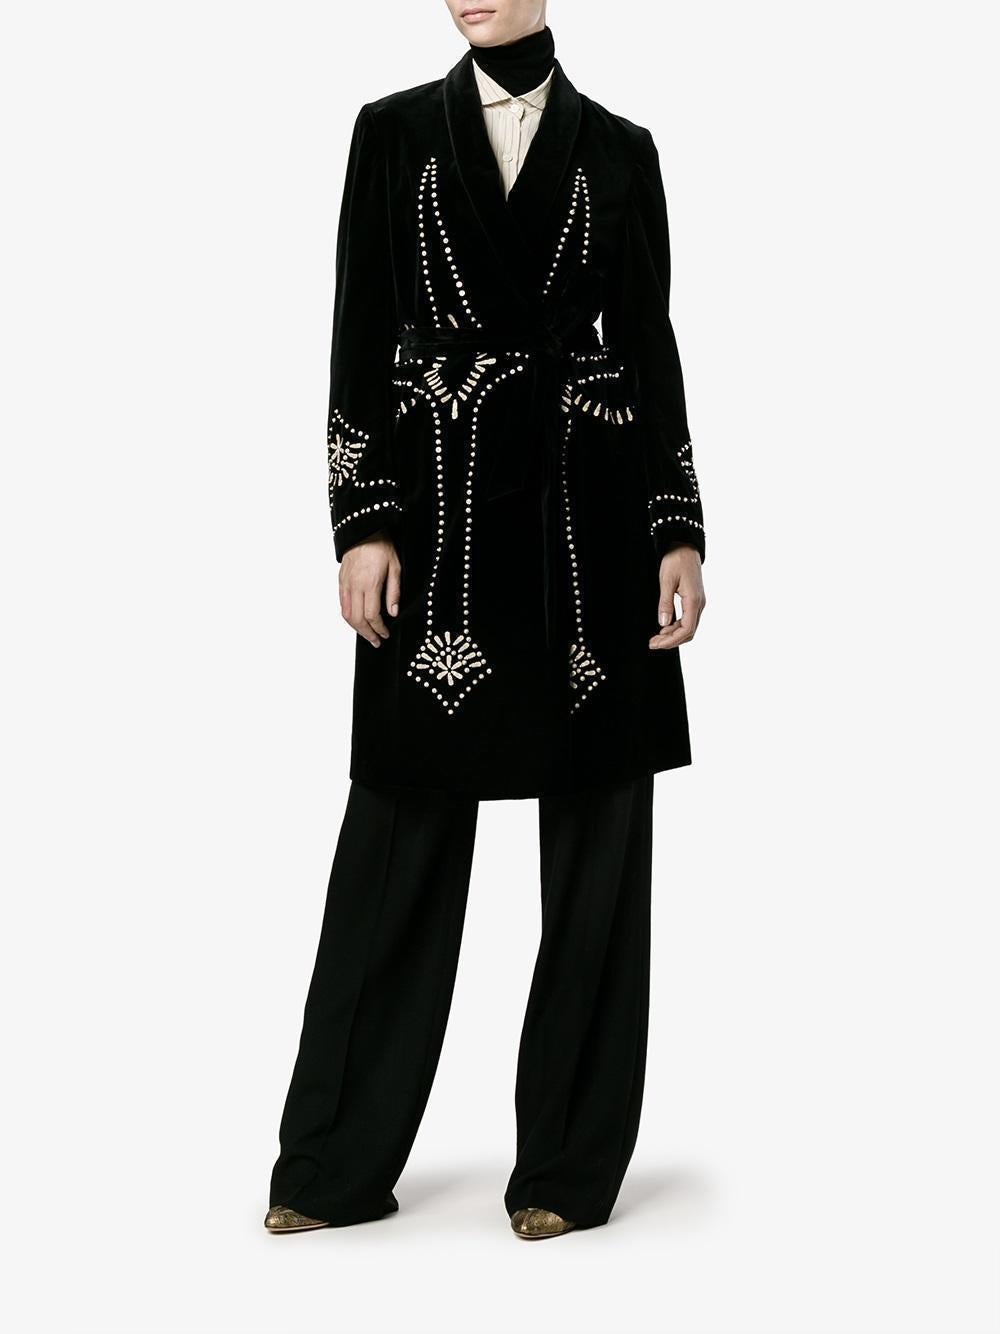 This knee-length coat has been designed from black velvet and was inspired by the fabled Luisa Casati — also Italian. 
Featuring a shawl collar
Long sleeves
Adjustable self-tie waist belt
Silver-tone sequin embellishment
Outer Composition: